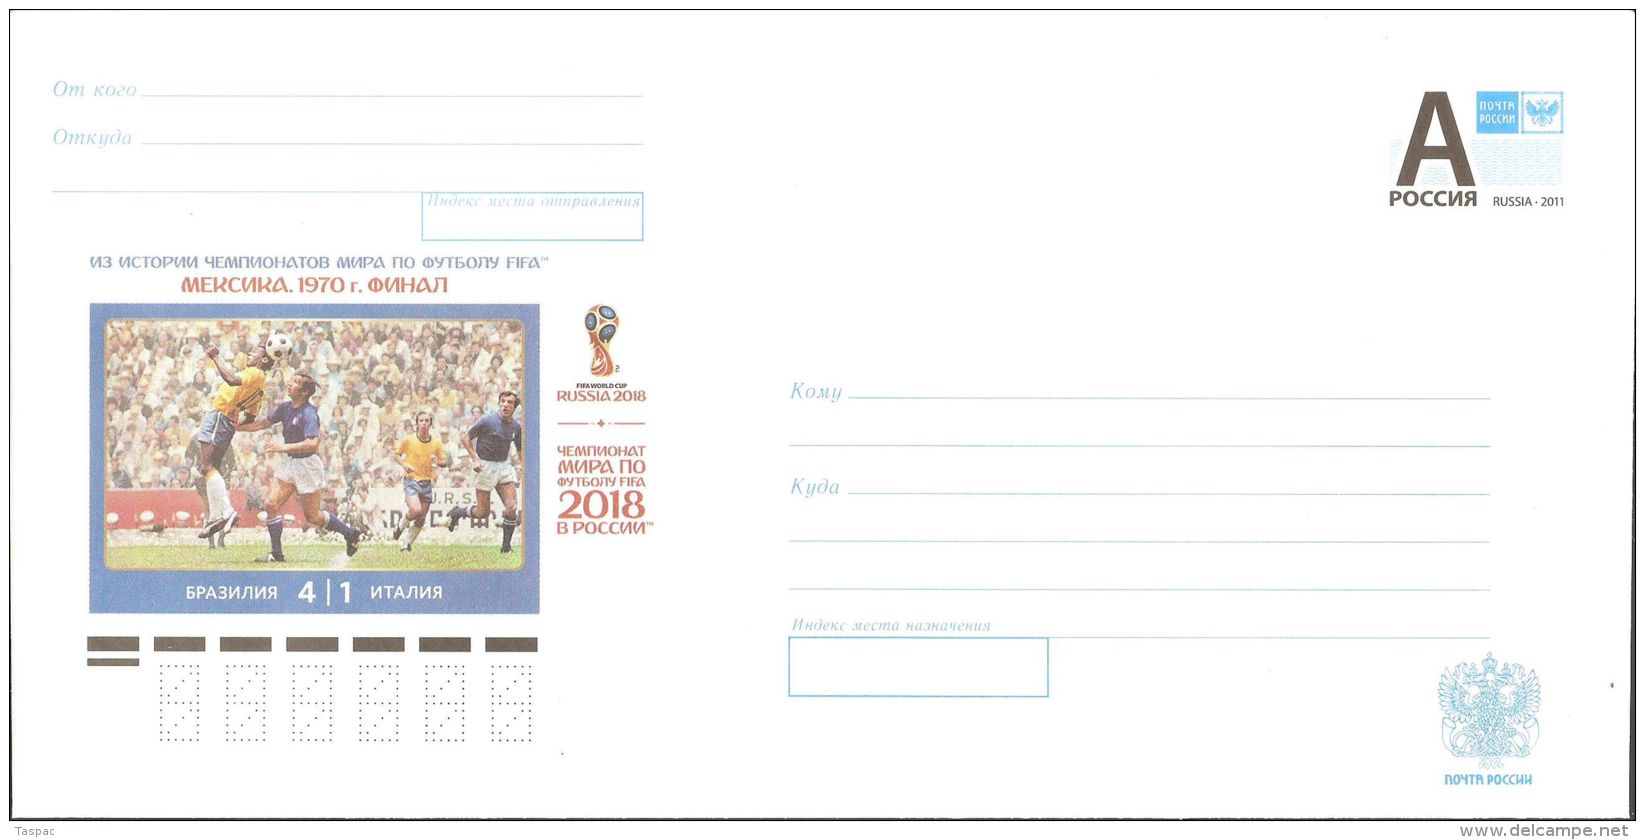 Russia 2016 # 042 Postal Stationery Cover Unused - History Of World Cup Soccer Championship, Mexico 1970 - 2018 – Russia